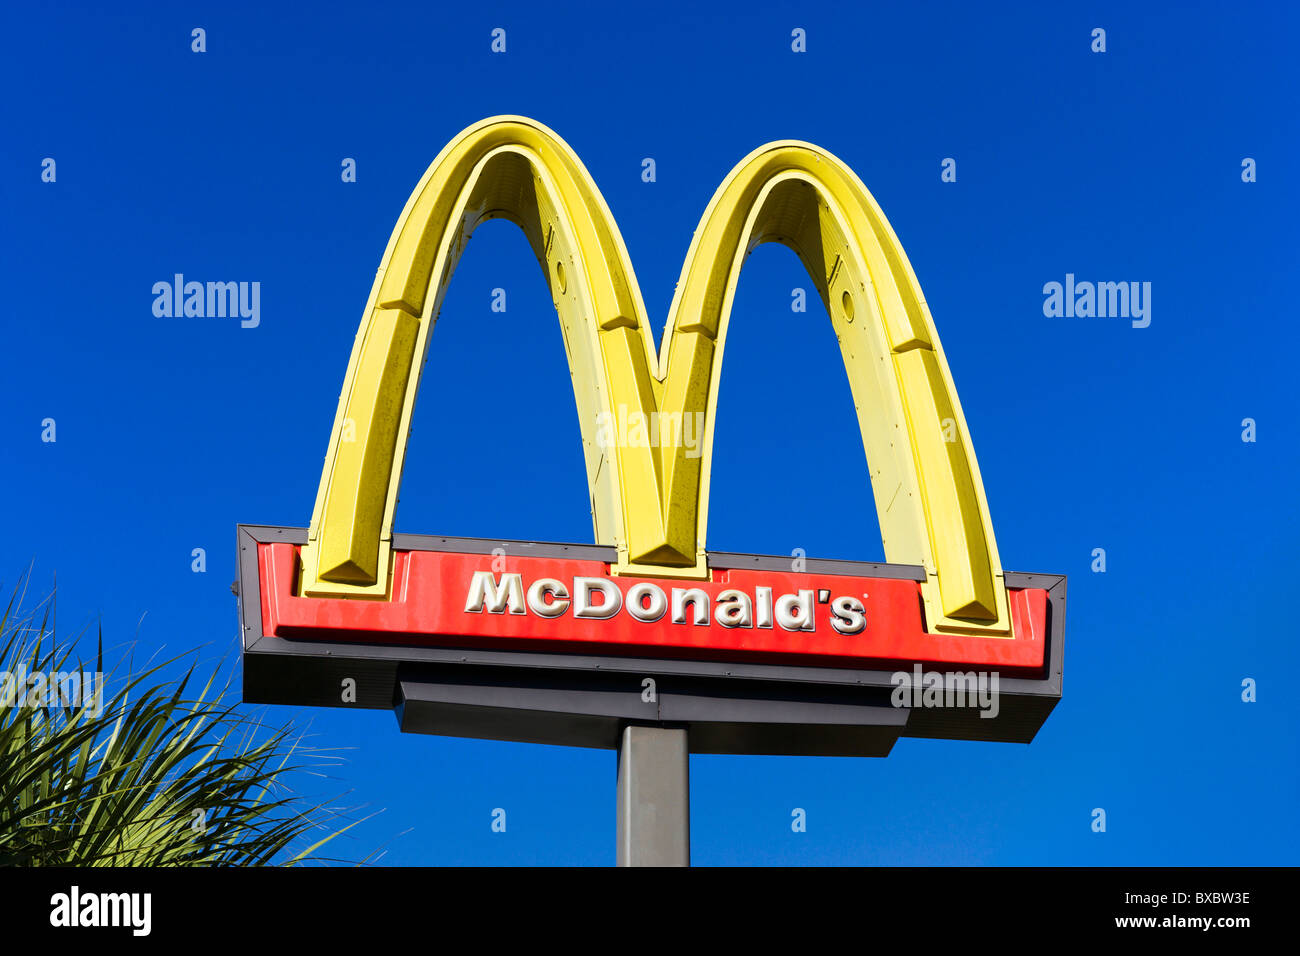 McDonald's fast food restaurant sign, Haines City, Central Florida, USA Stock Photo